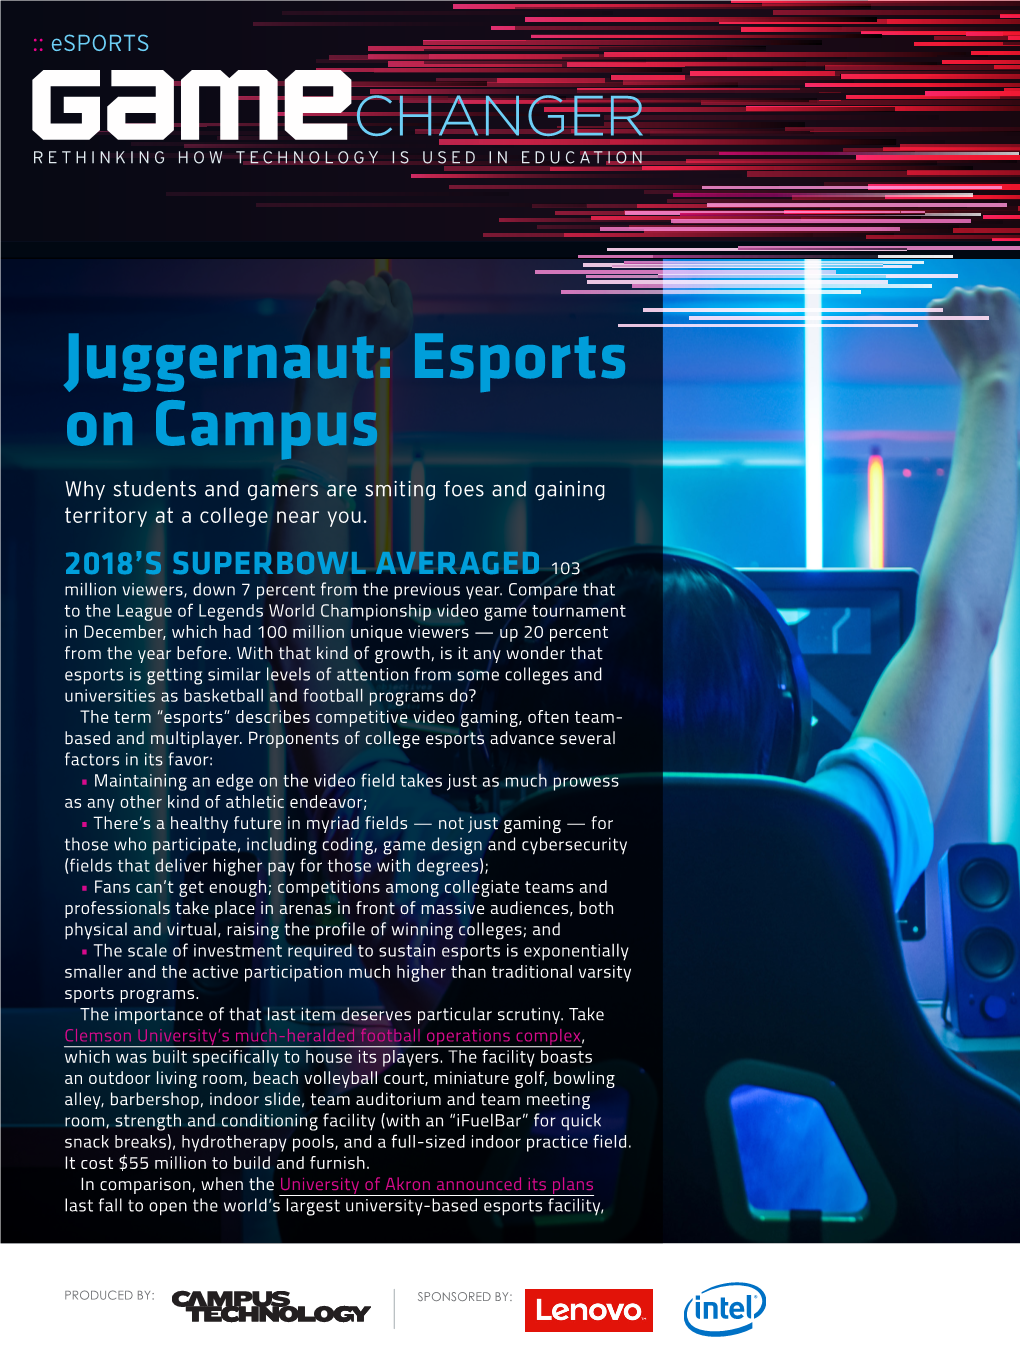 Juggernaut: Esports on Campus Why Students and Gamers Are Smiting Foes and Gaining Territory at a College Near You